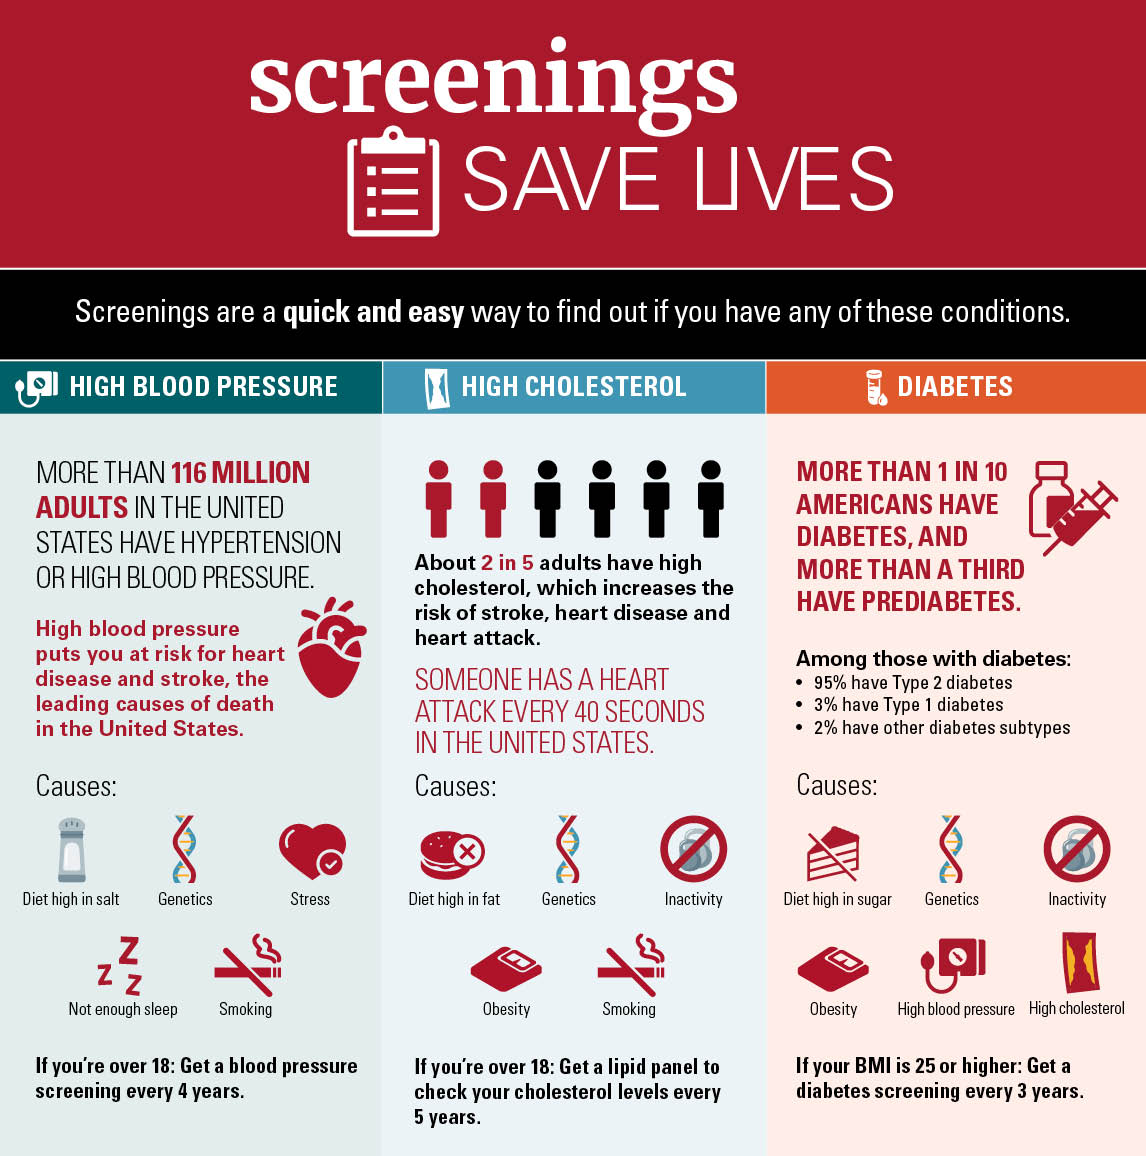 Stats on the positive impact of screenings